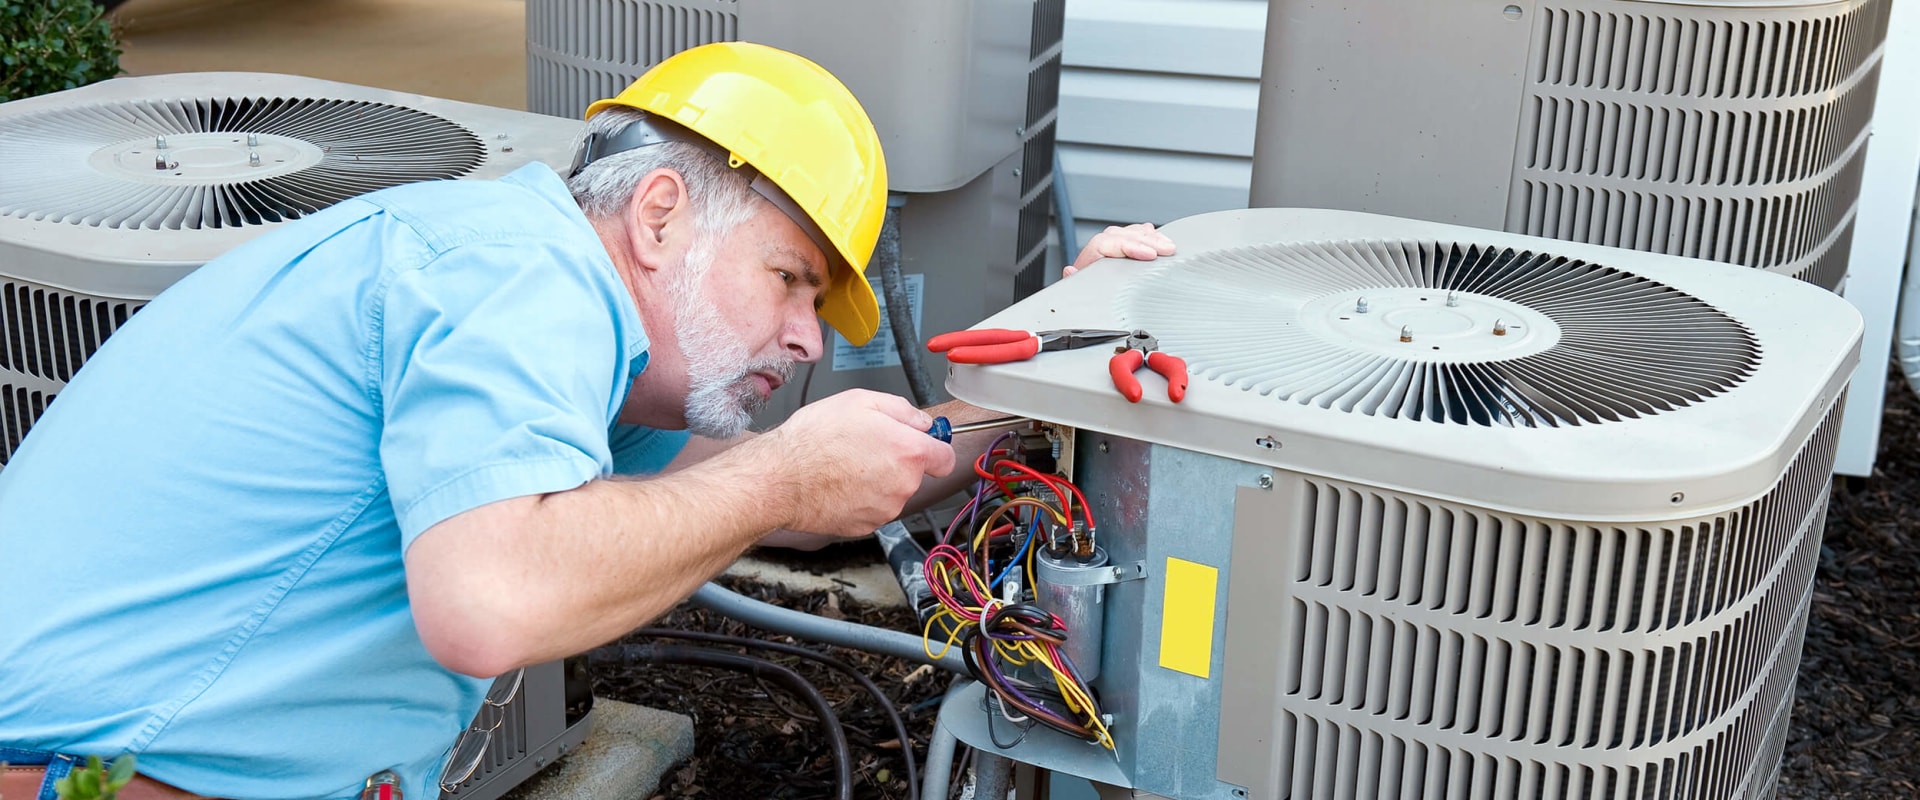 What Type of Warranty Do Homeowners in Coral Springs, FL Get for HVAC Repair Services?